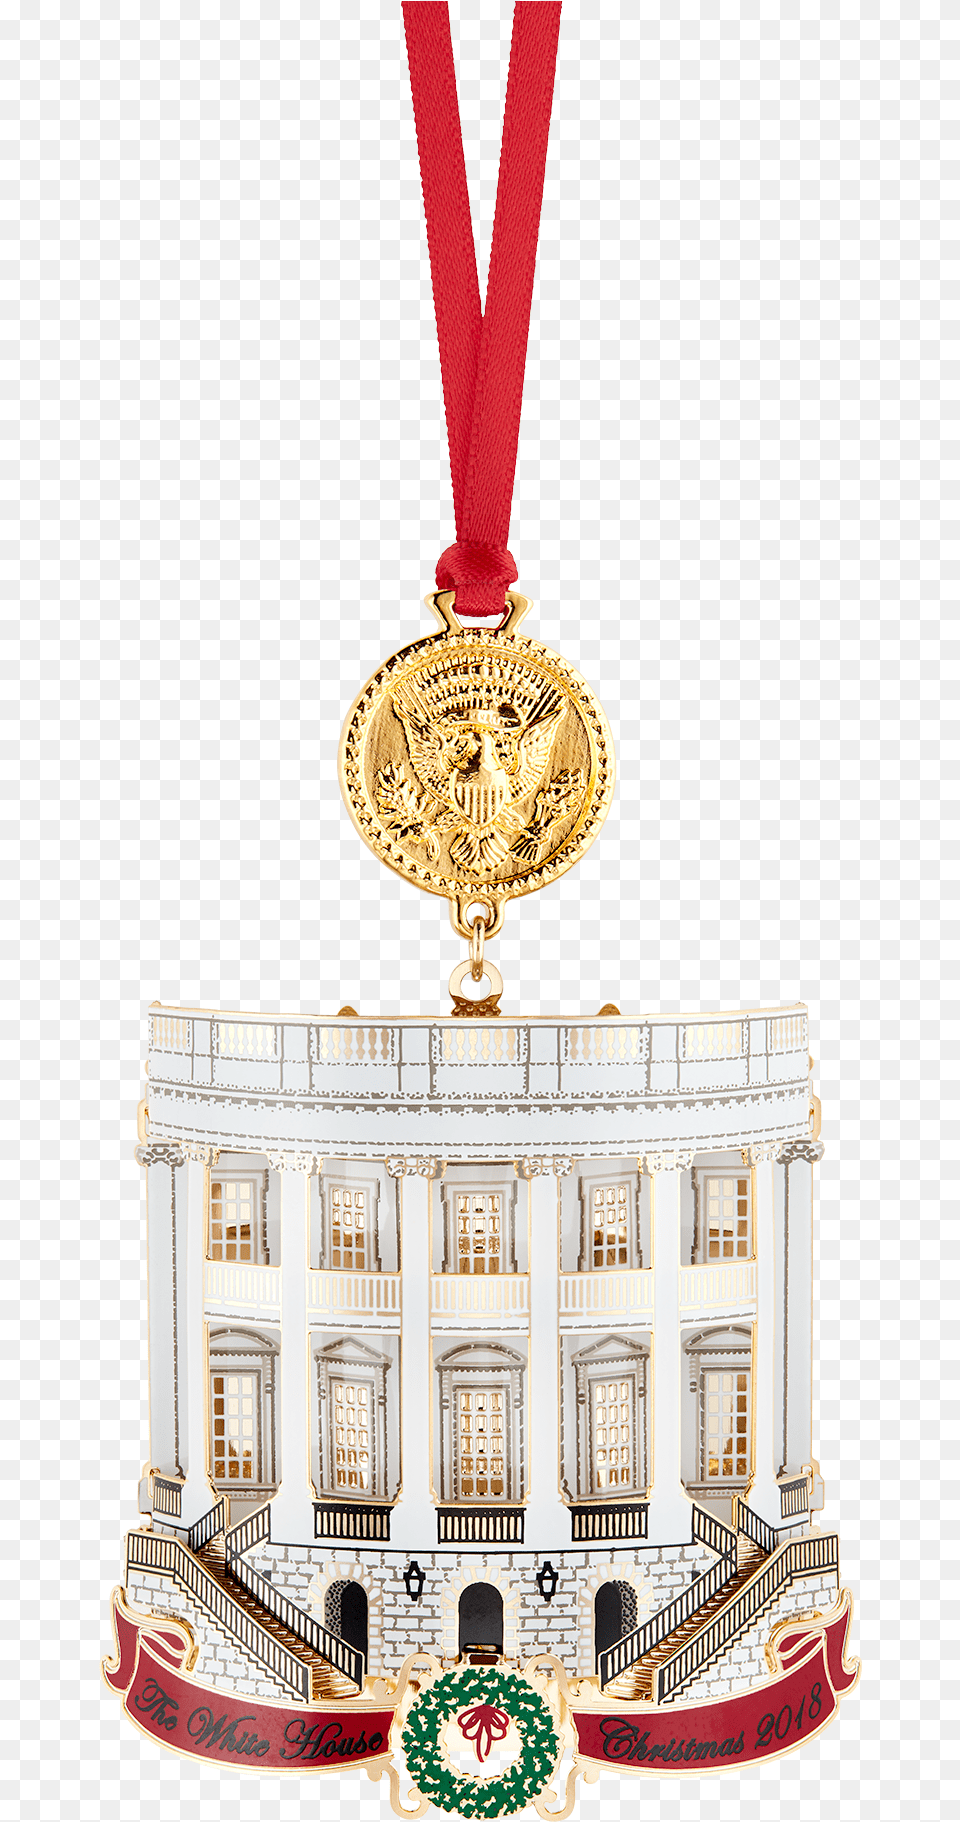 Official 2018 White House Christmas Ornament 2018 White House Christmas Ornament, Gold, Architecture, Building, Accessories Png